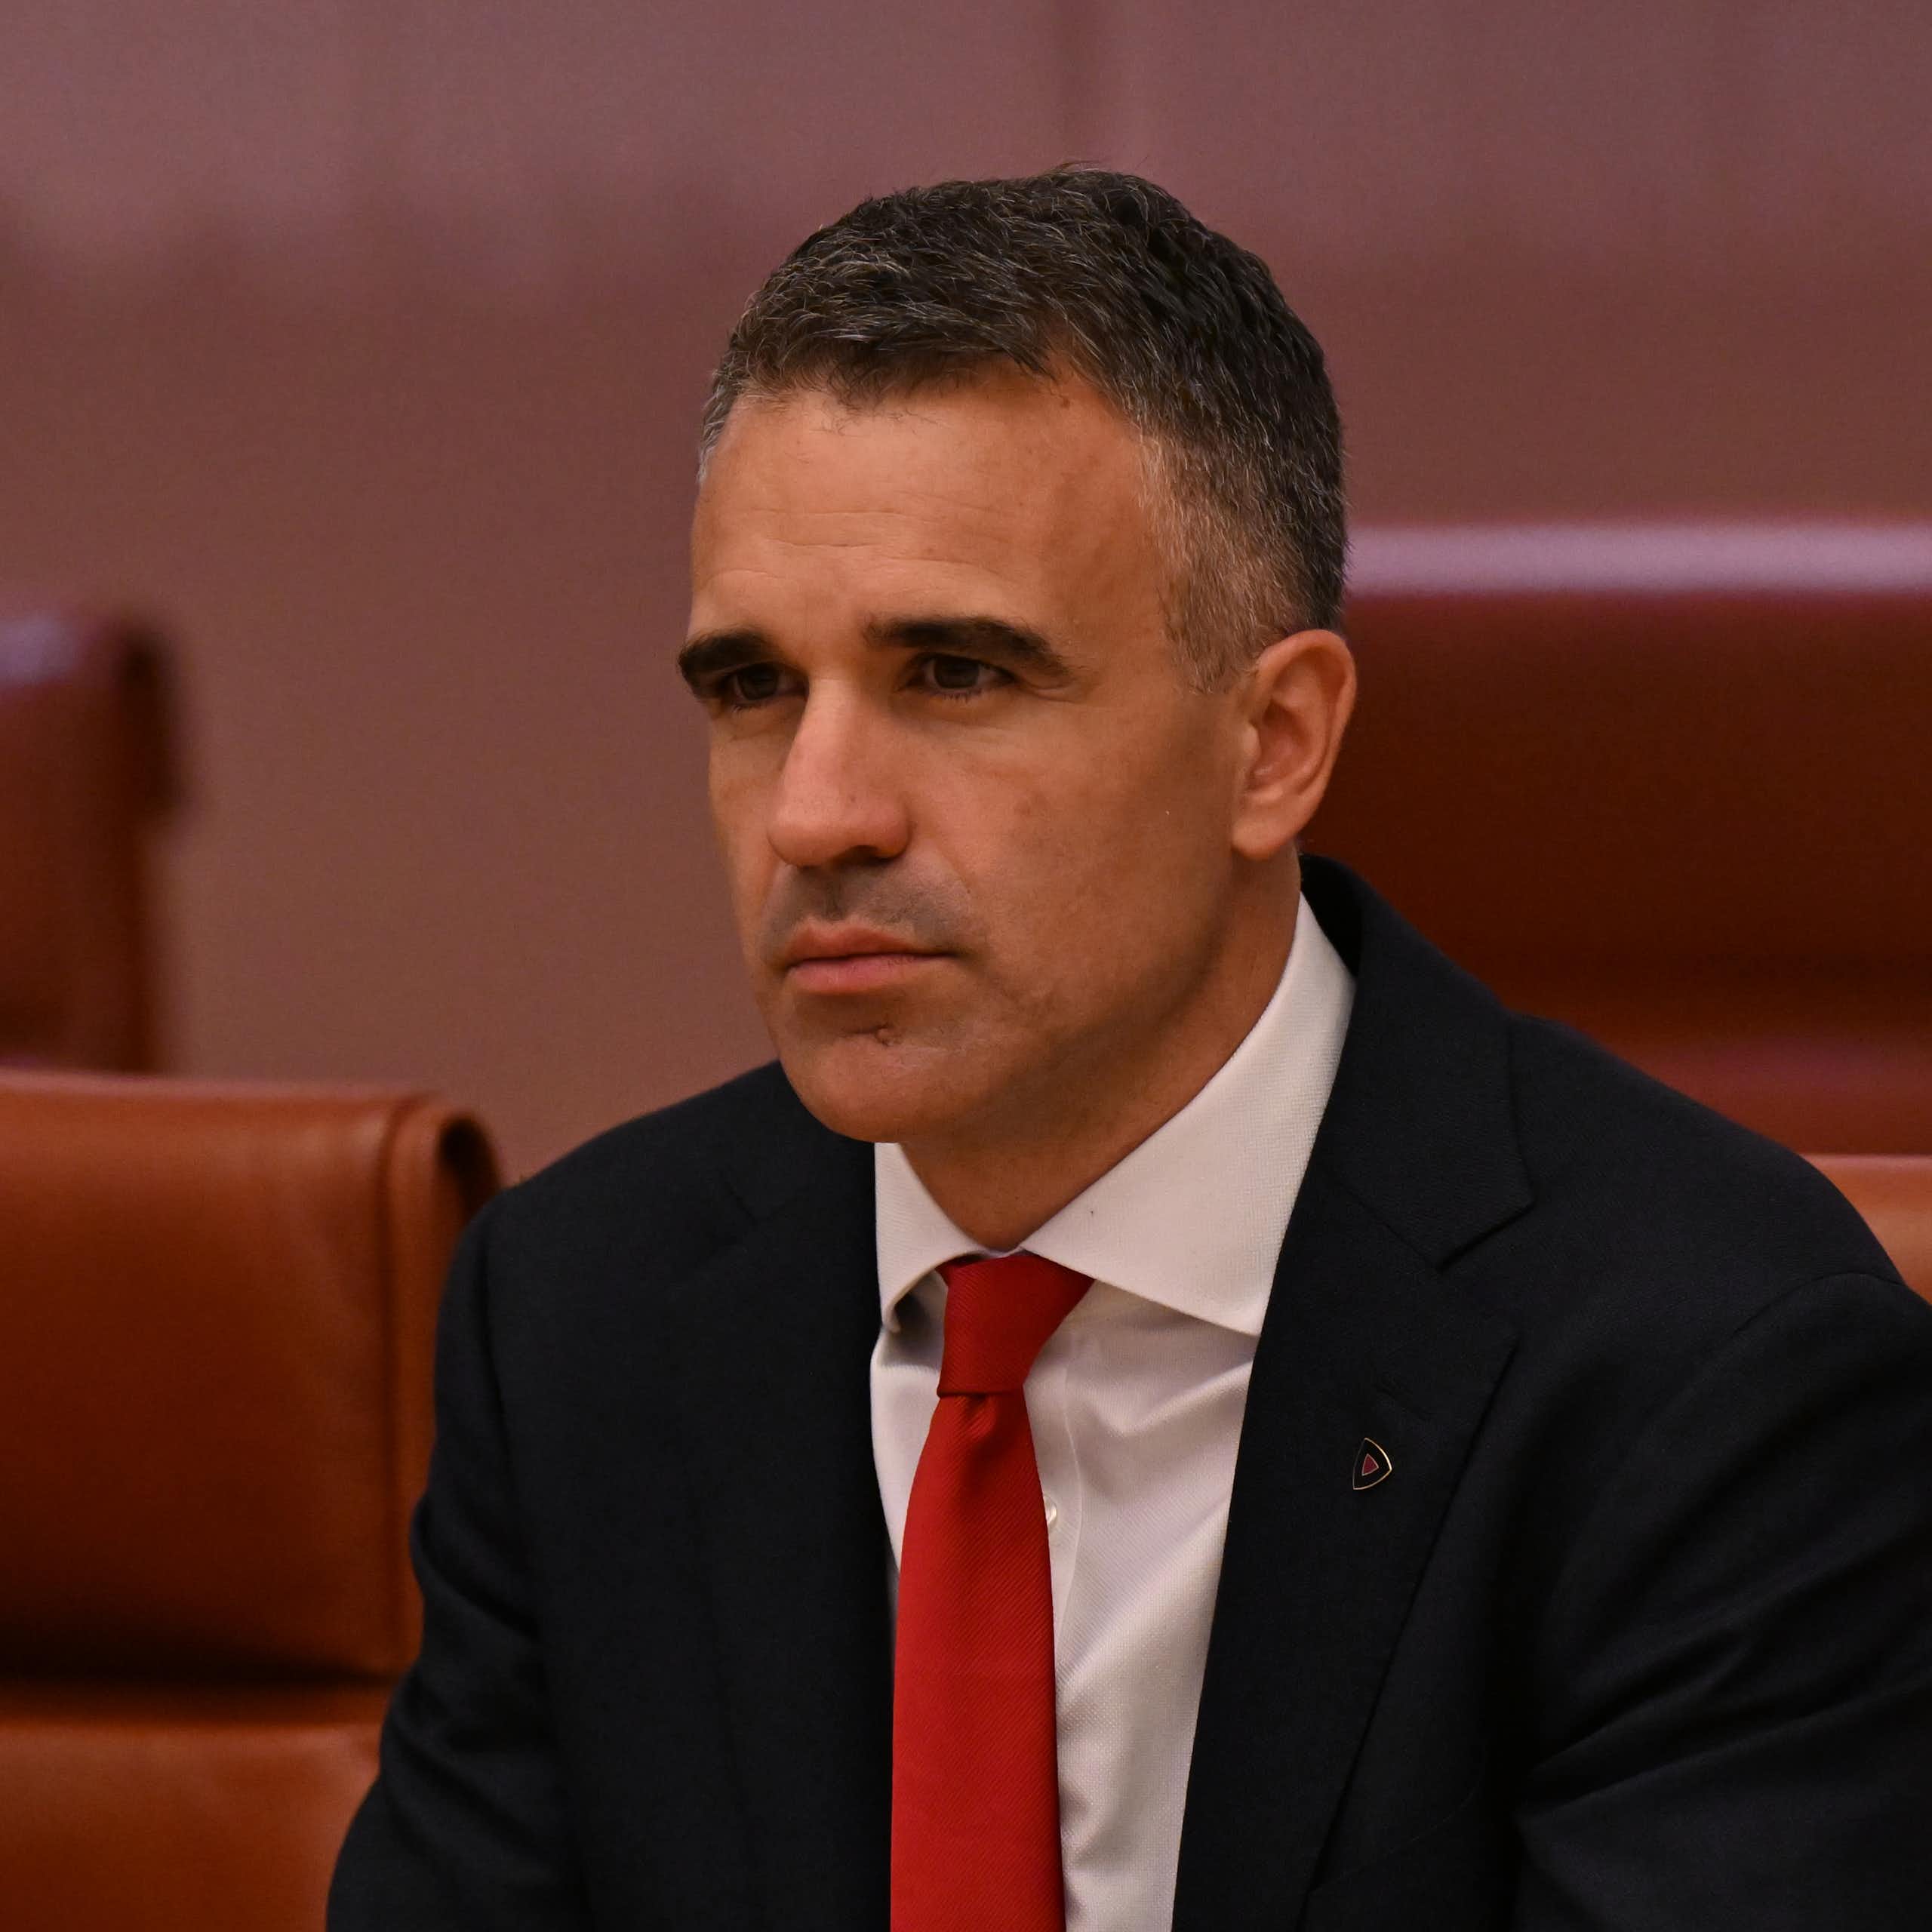 Politics with Michelle Grattan: Peter Malinauskas on political donations, kids on social media, and the nuclear option